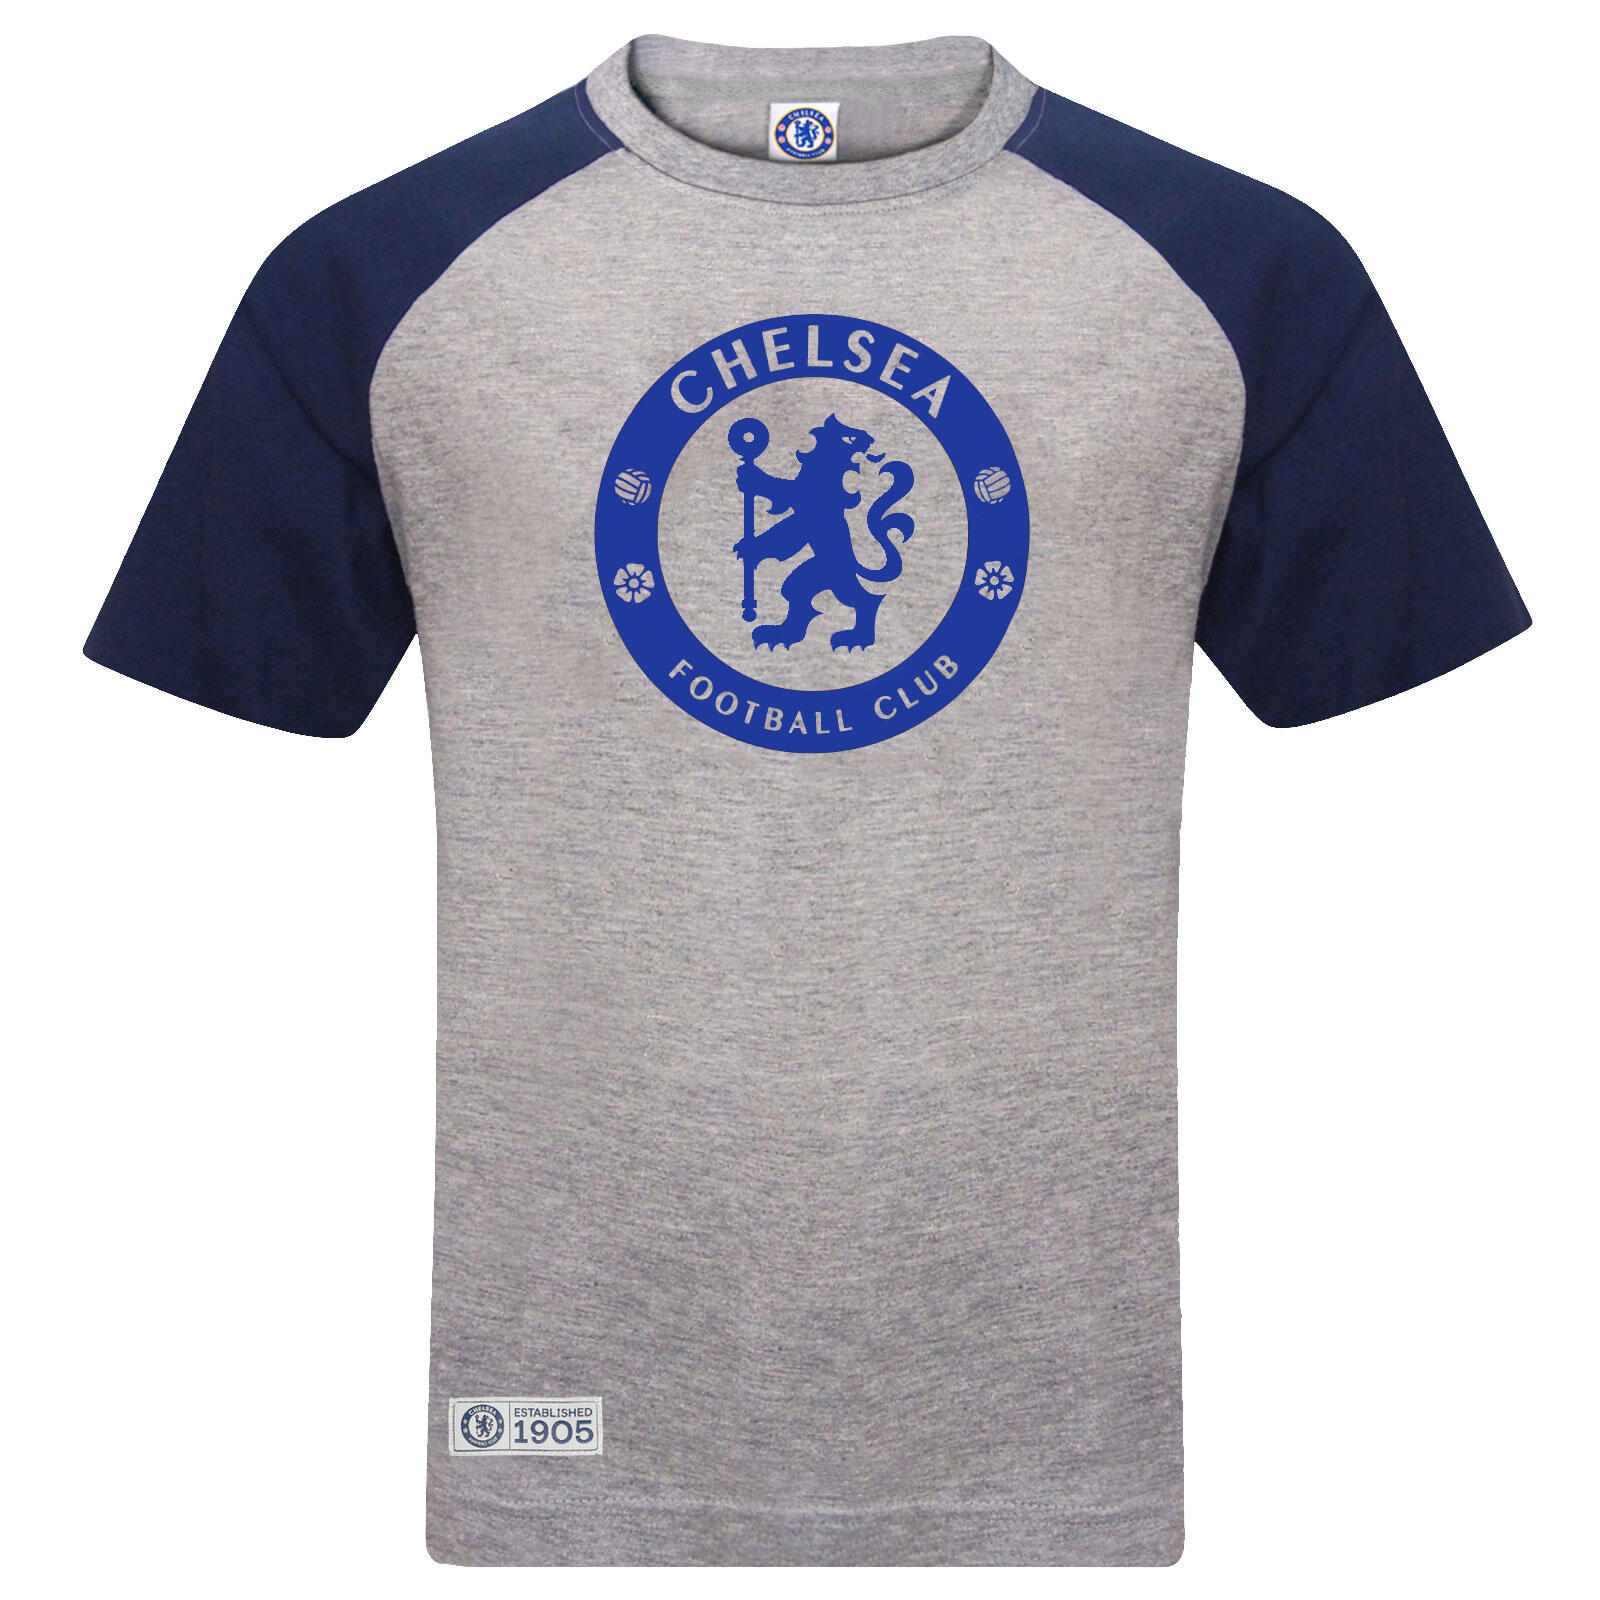 Chelsea FC Boys T-Shirt Graphic Kids OFFICIAL Football Gift 1/4